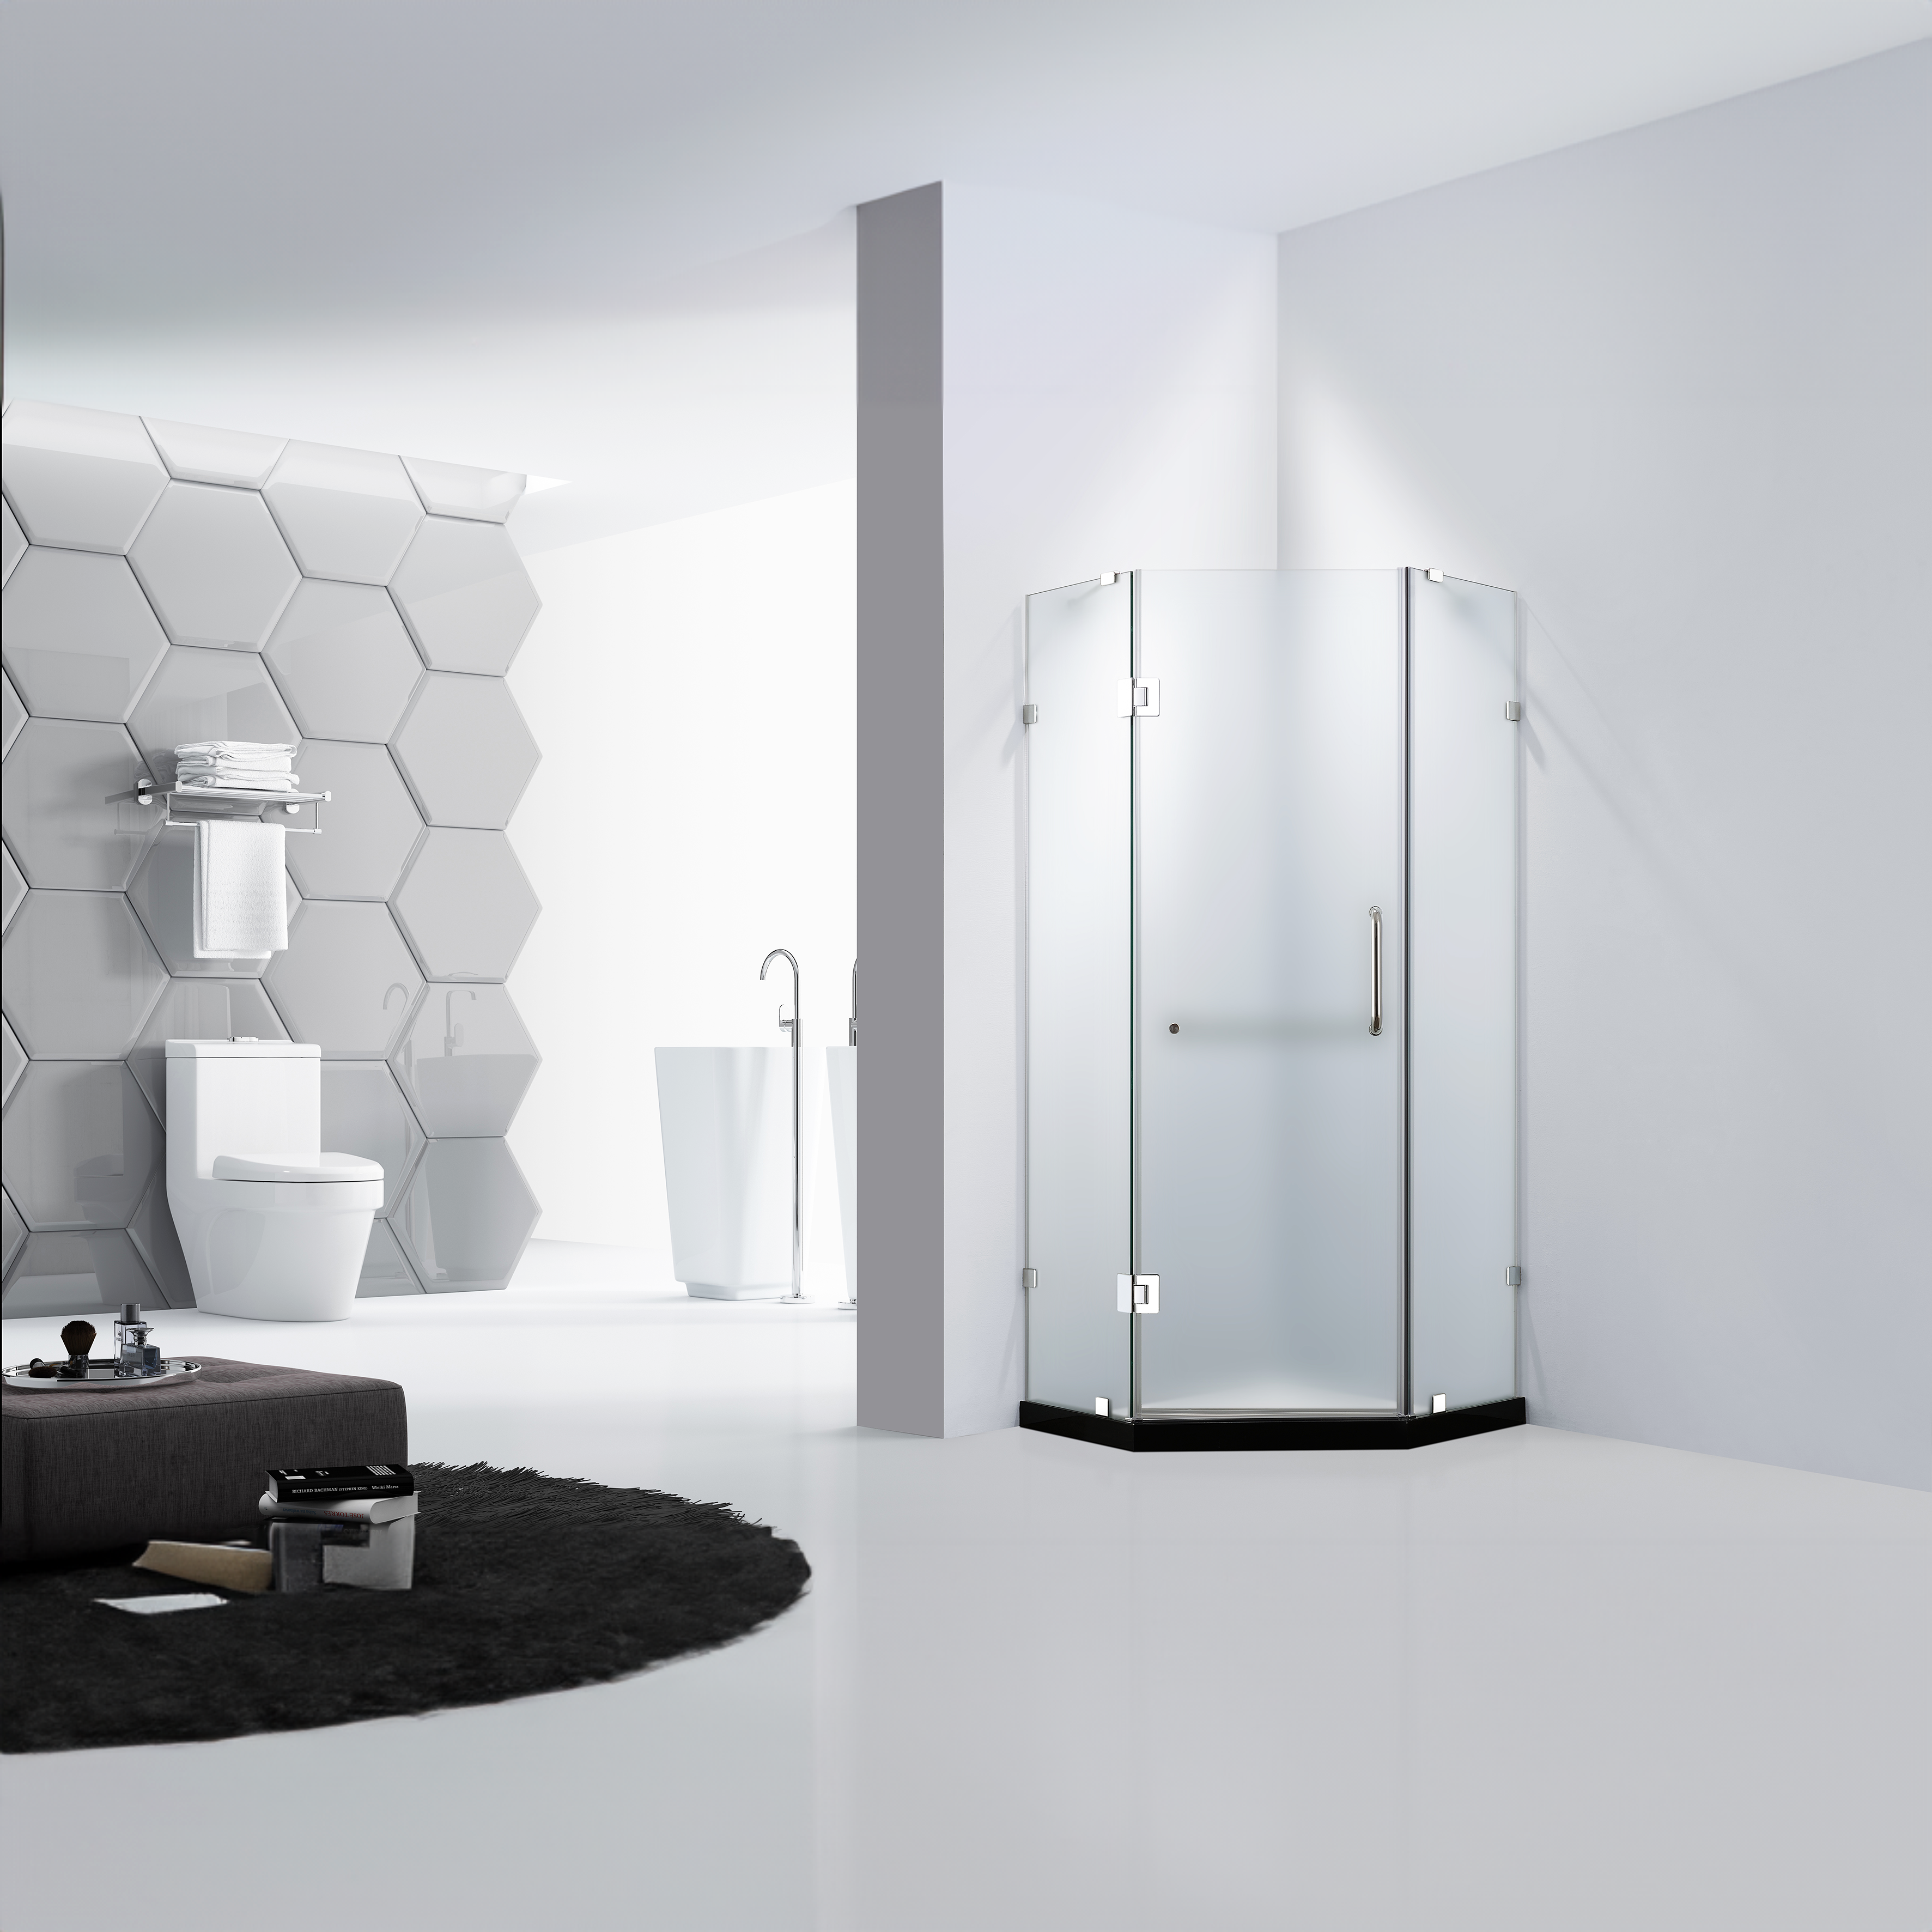 Dreamwerks 36 in. W x 79 in. H Frameless Neo-Angle Hinged Shower Door (Left) in Chrome with Handle - Frosted Glass